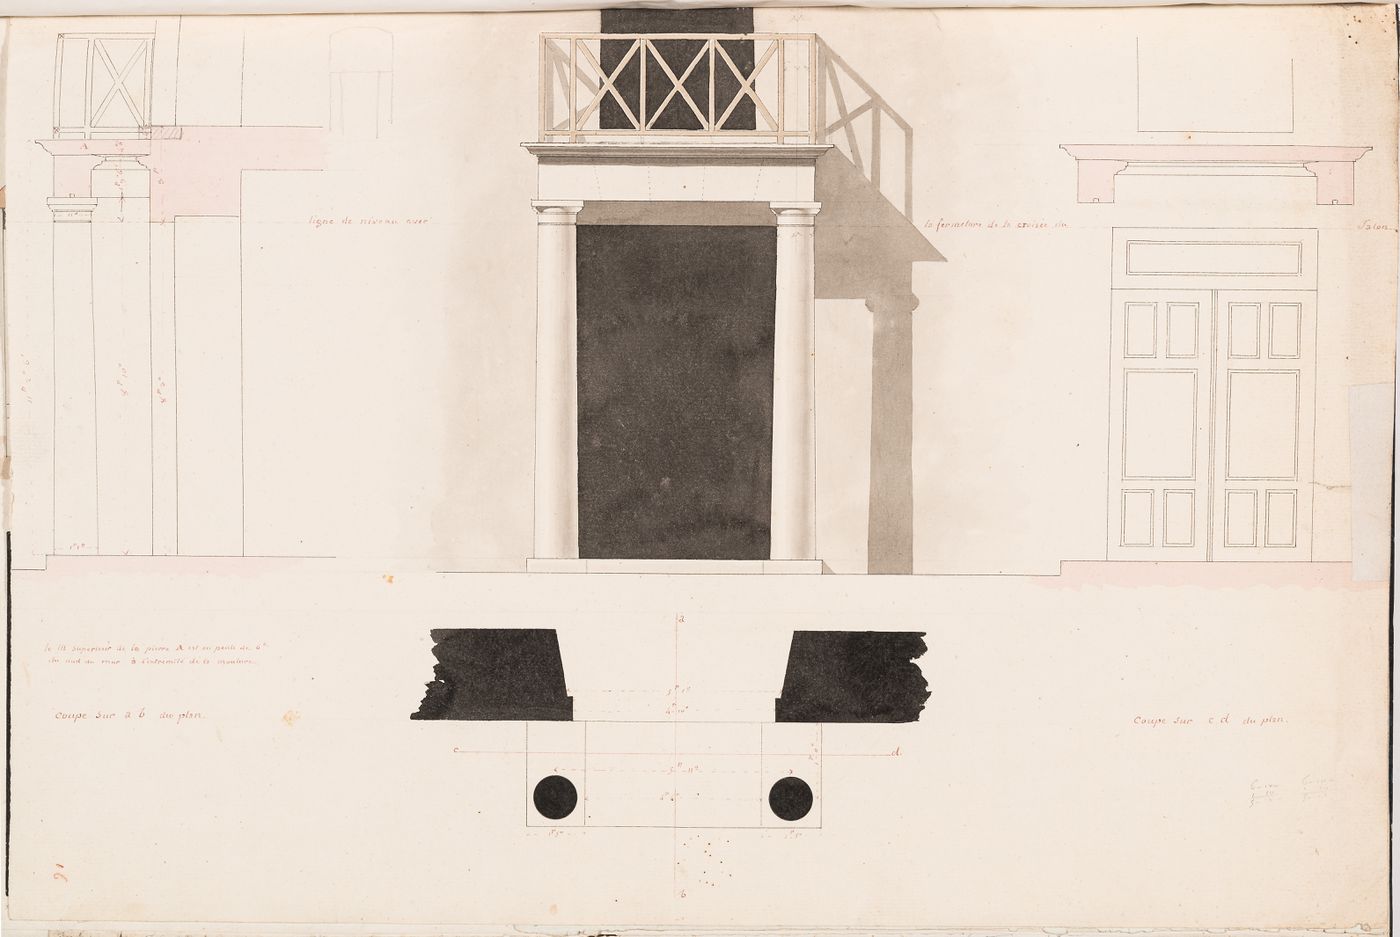 Plan, elevation and sections for the portico of the house, Domaine de La Vallée